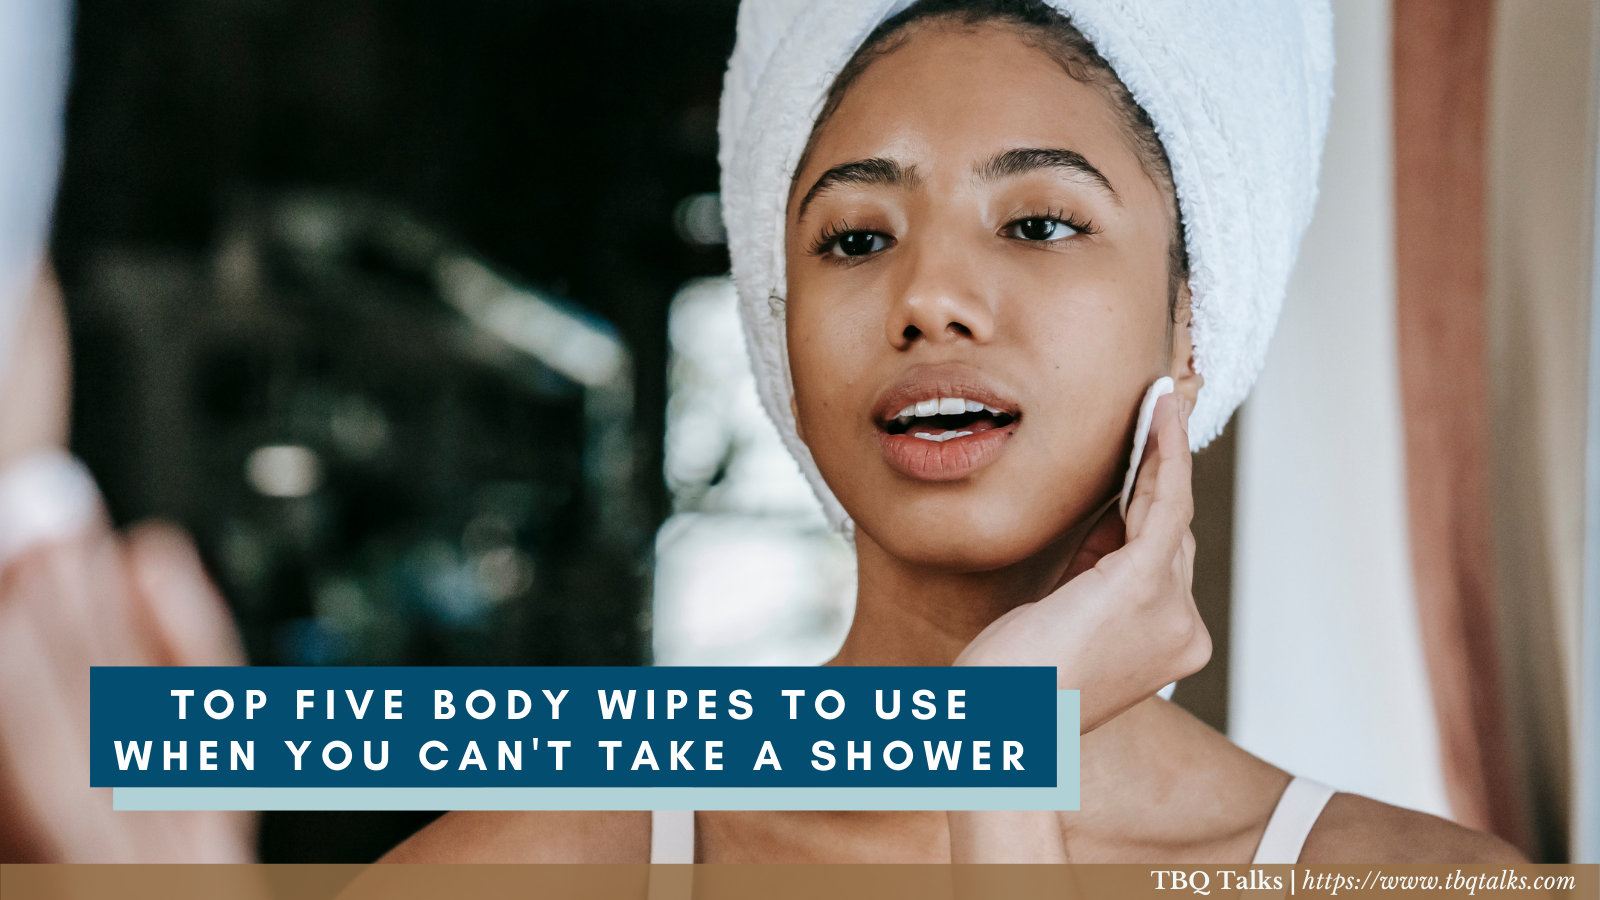 Top Five Body Wipes To Use When You Can't Take A Shower